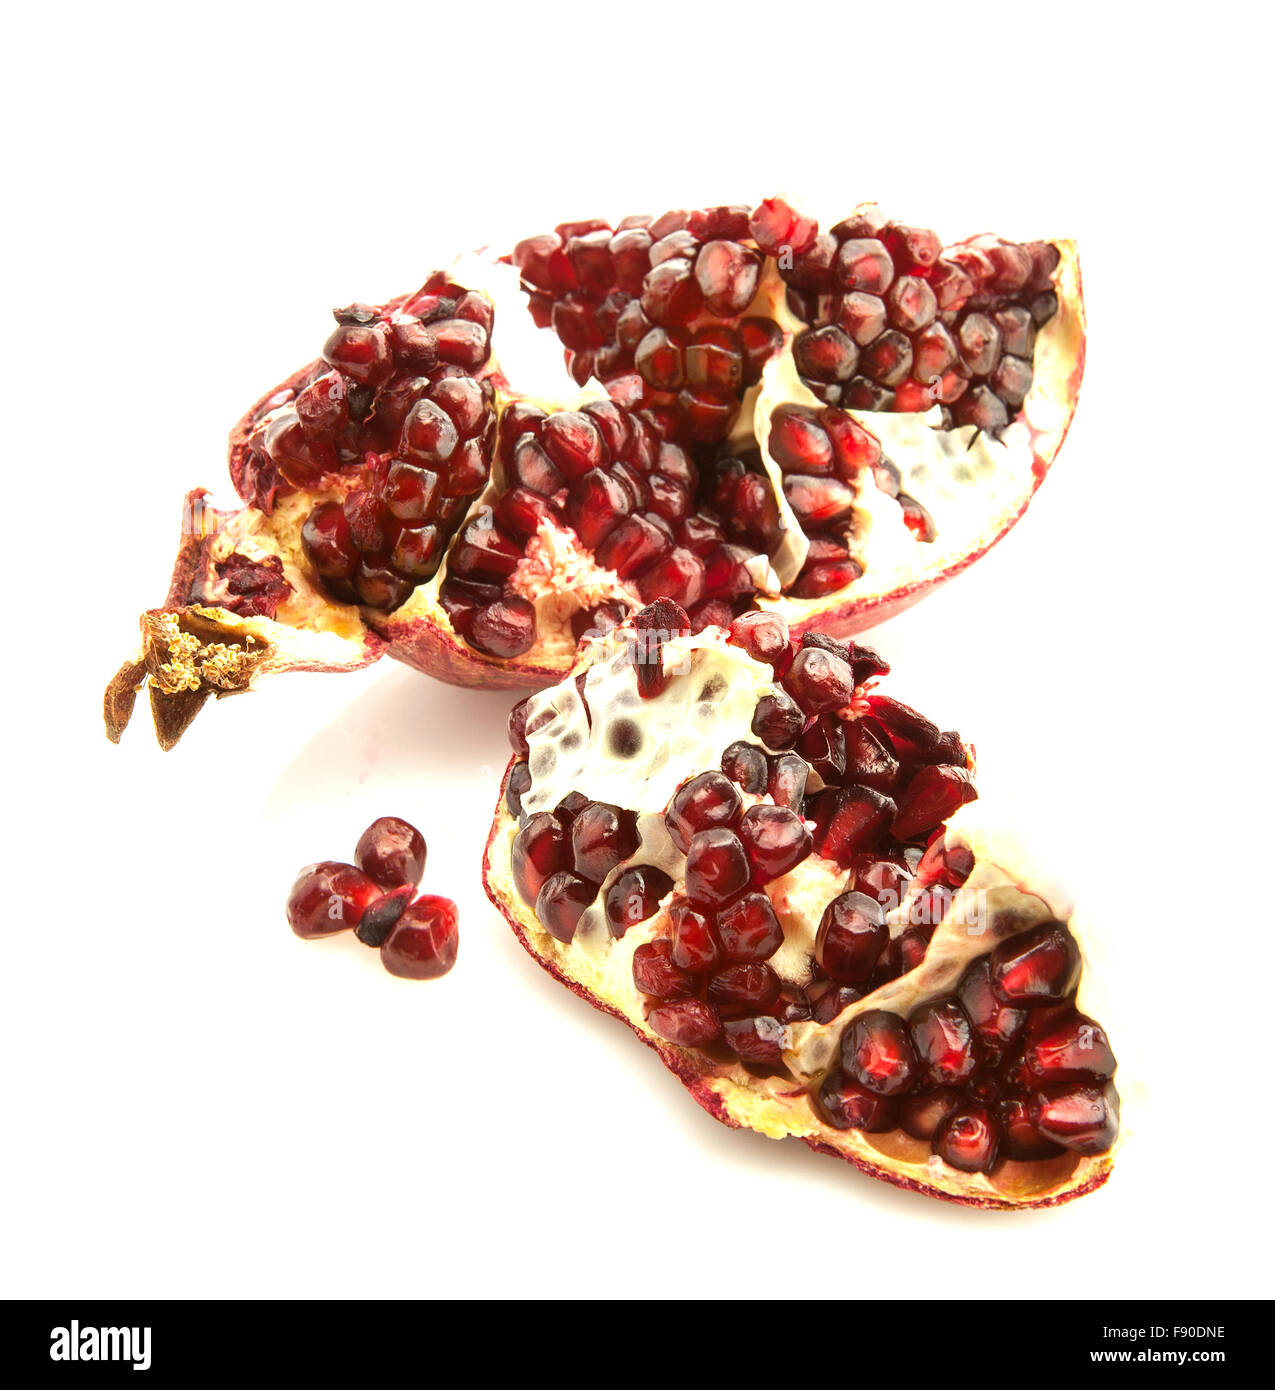 Pieces of pomegranate on a white background Stock Photo